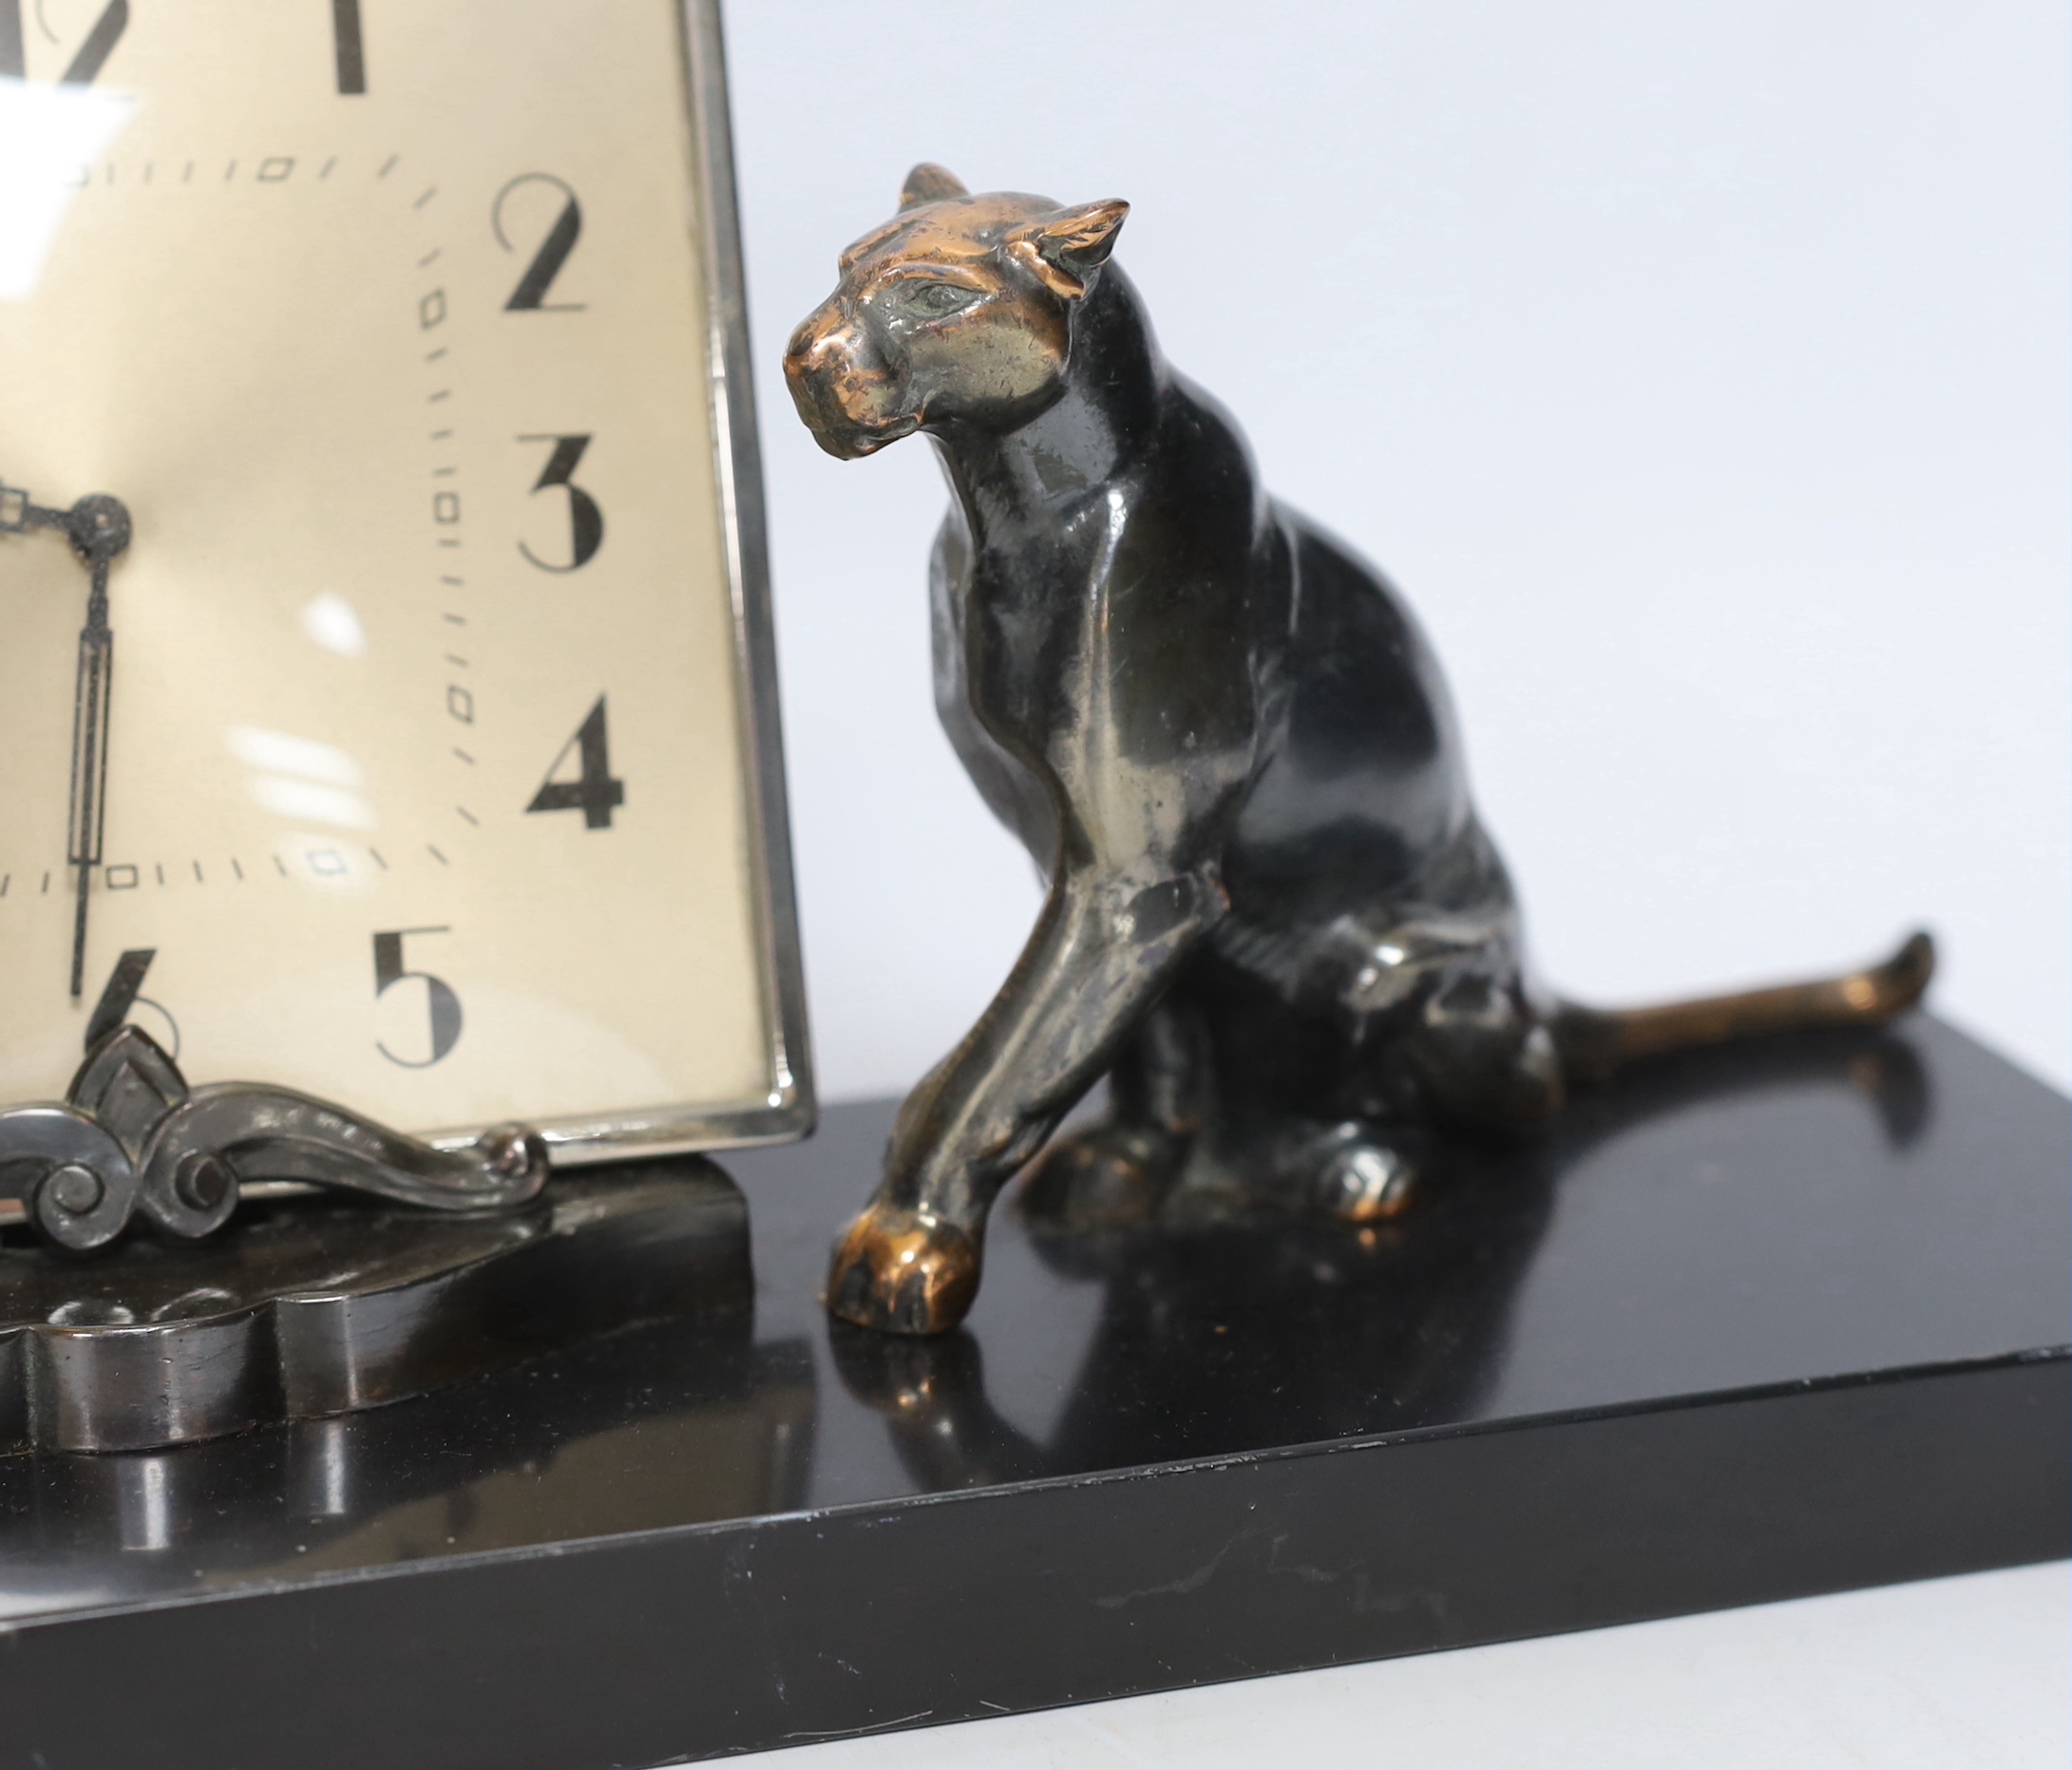 A patinated spelter Art Deco clock surmounted with two panthers, 40cm high